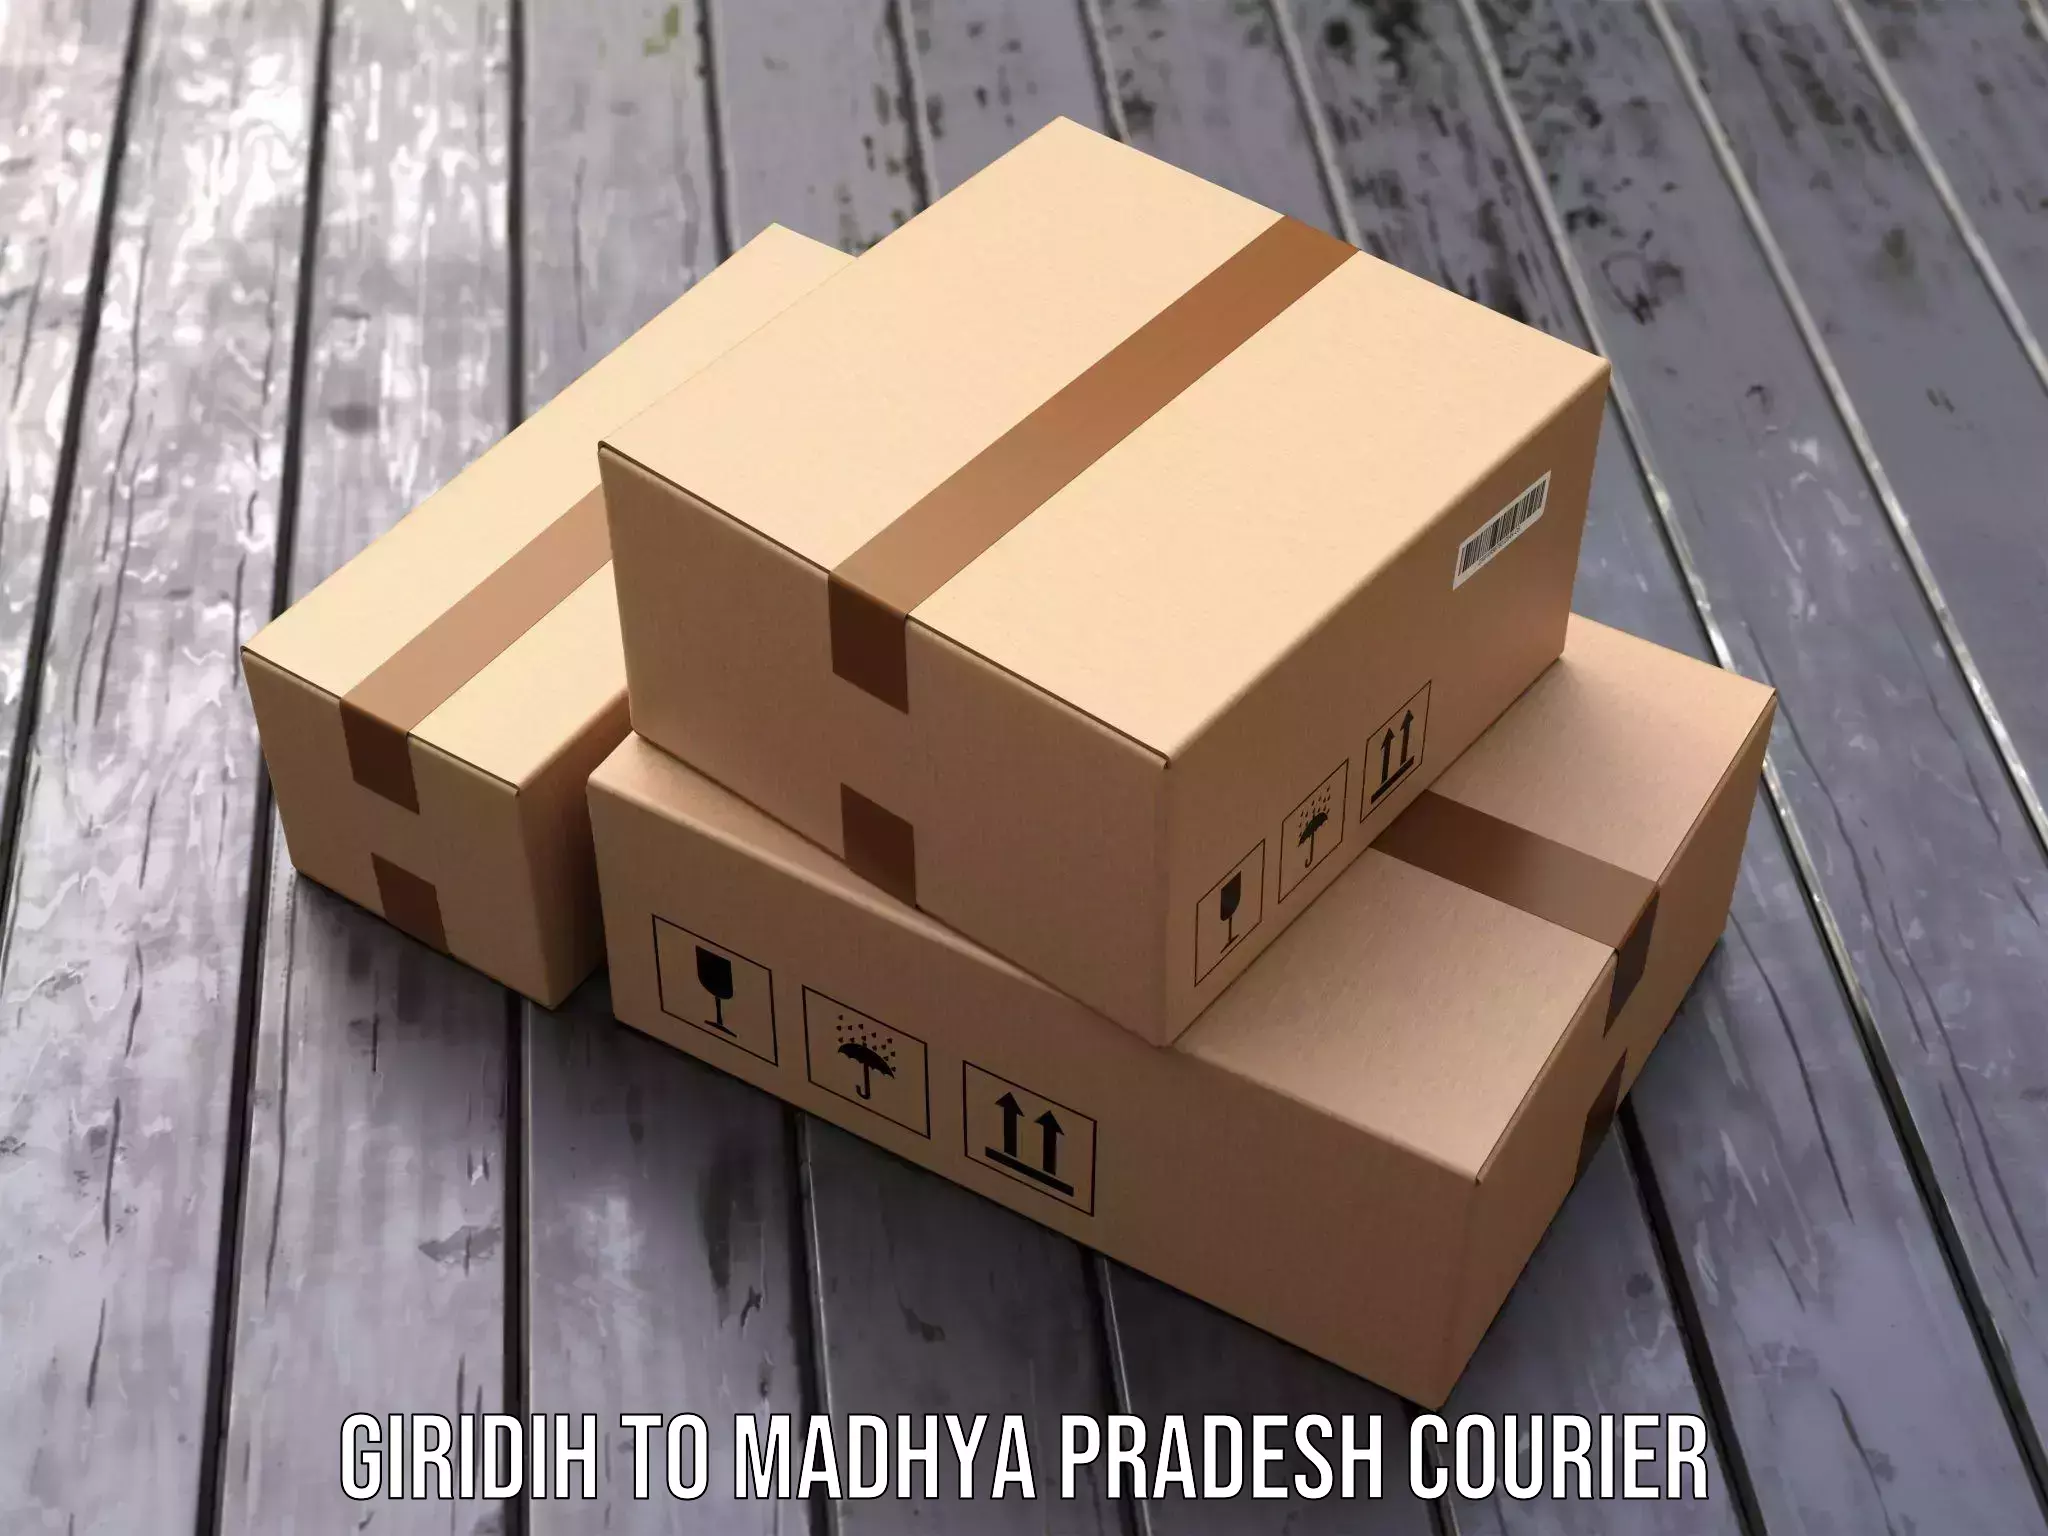 Specialized courier services Giridih to Rampur Baghelan